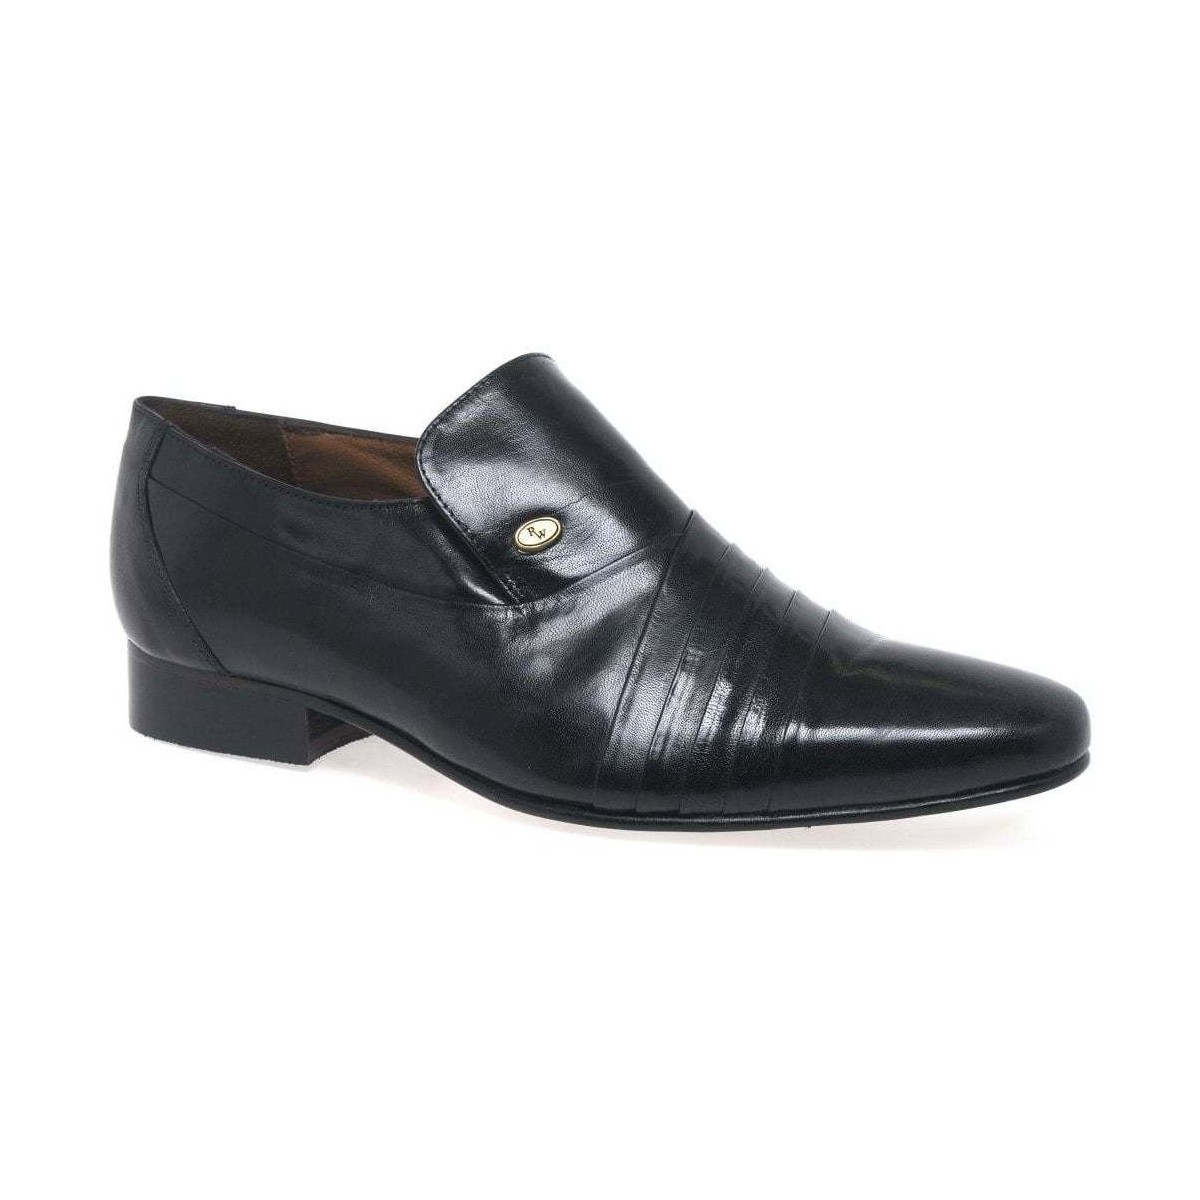 Shoes Men Derby Shoes & Brogues Rombah Wallace Warwick Mens Formal Slip On Shoes Black